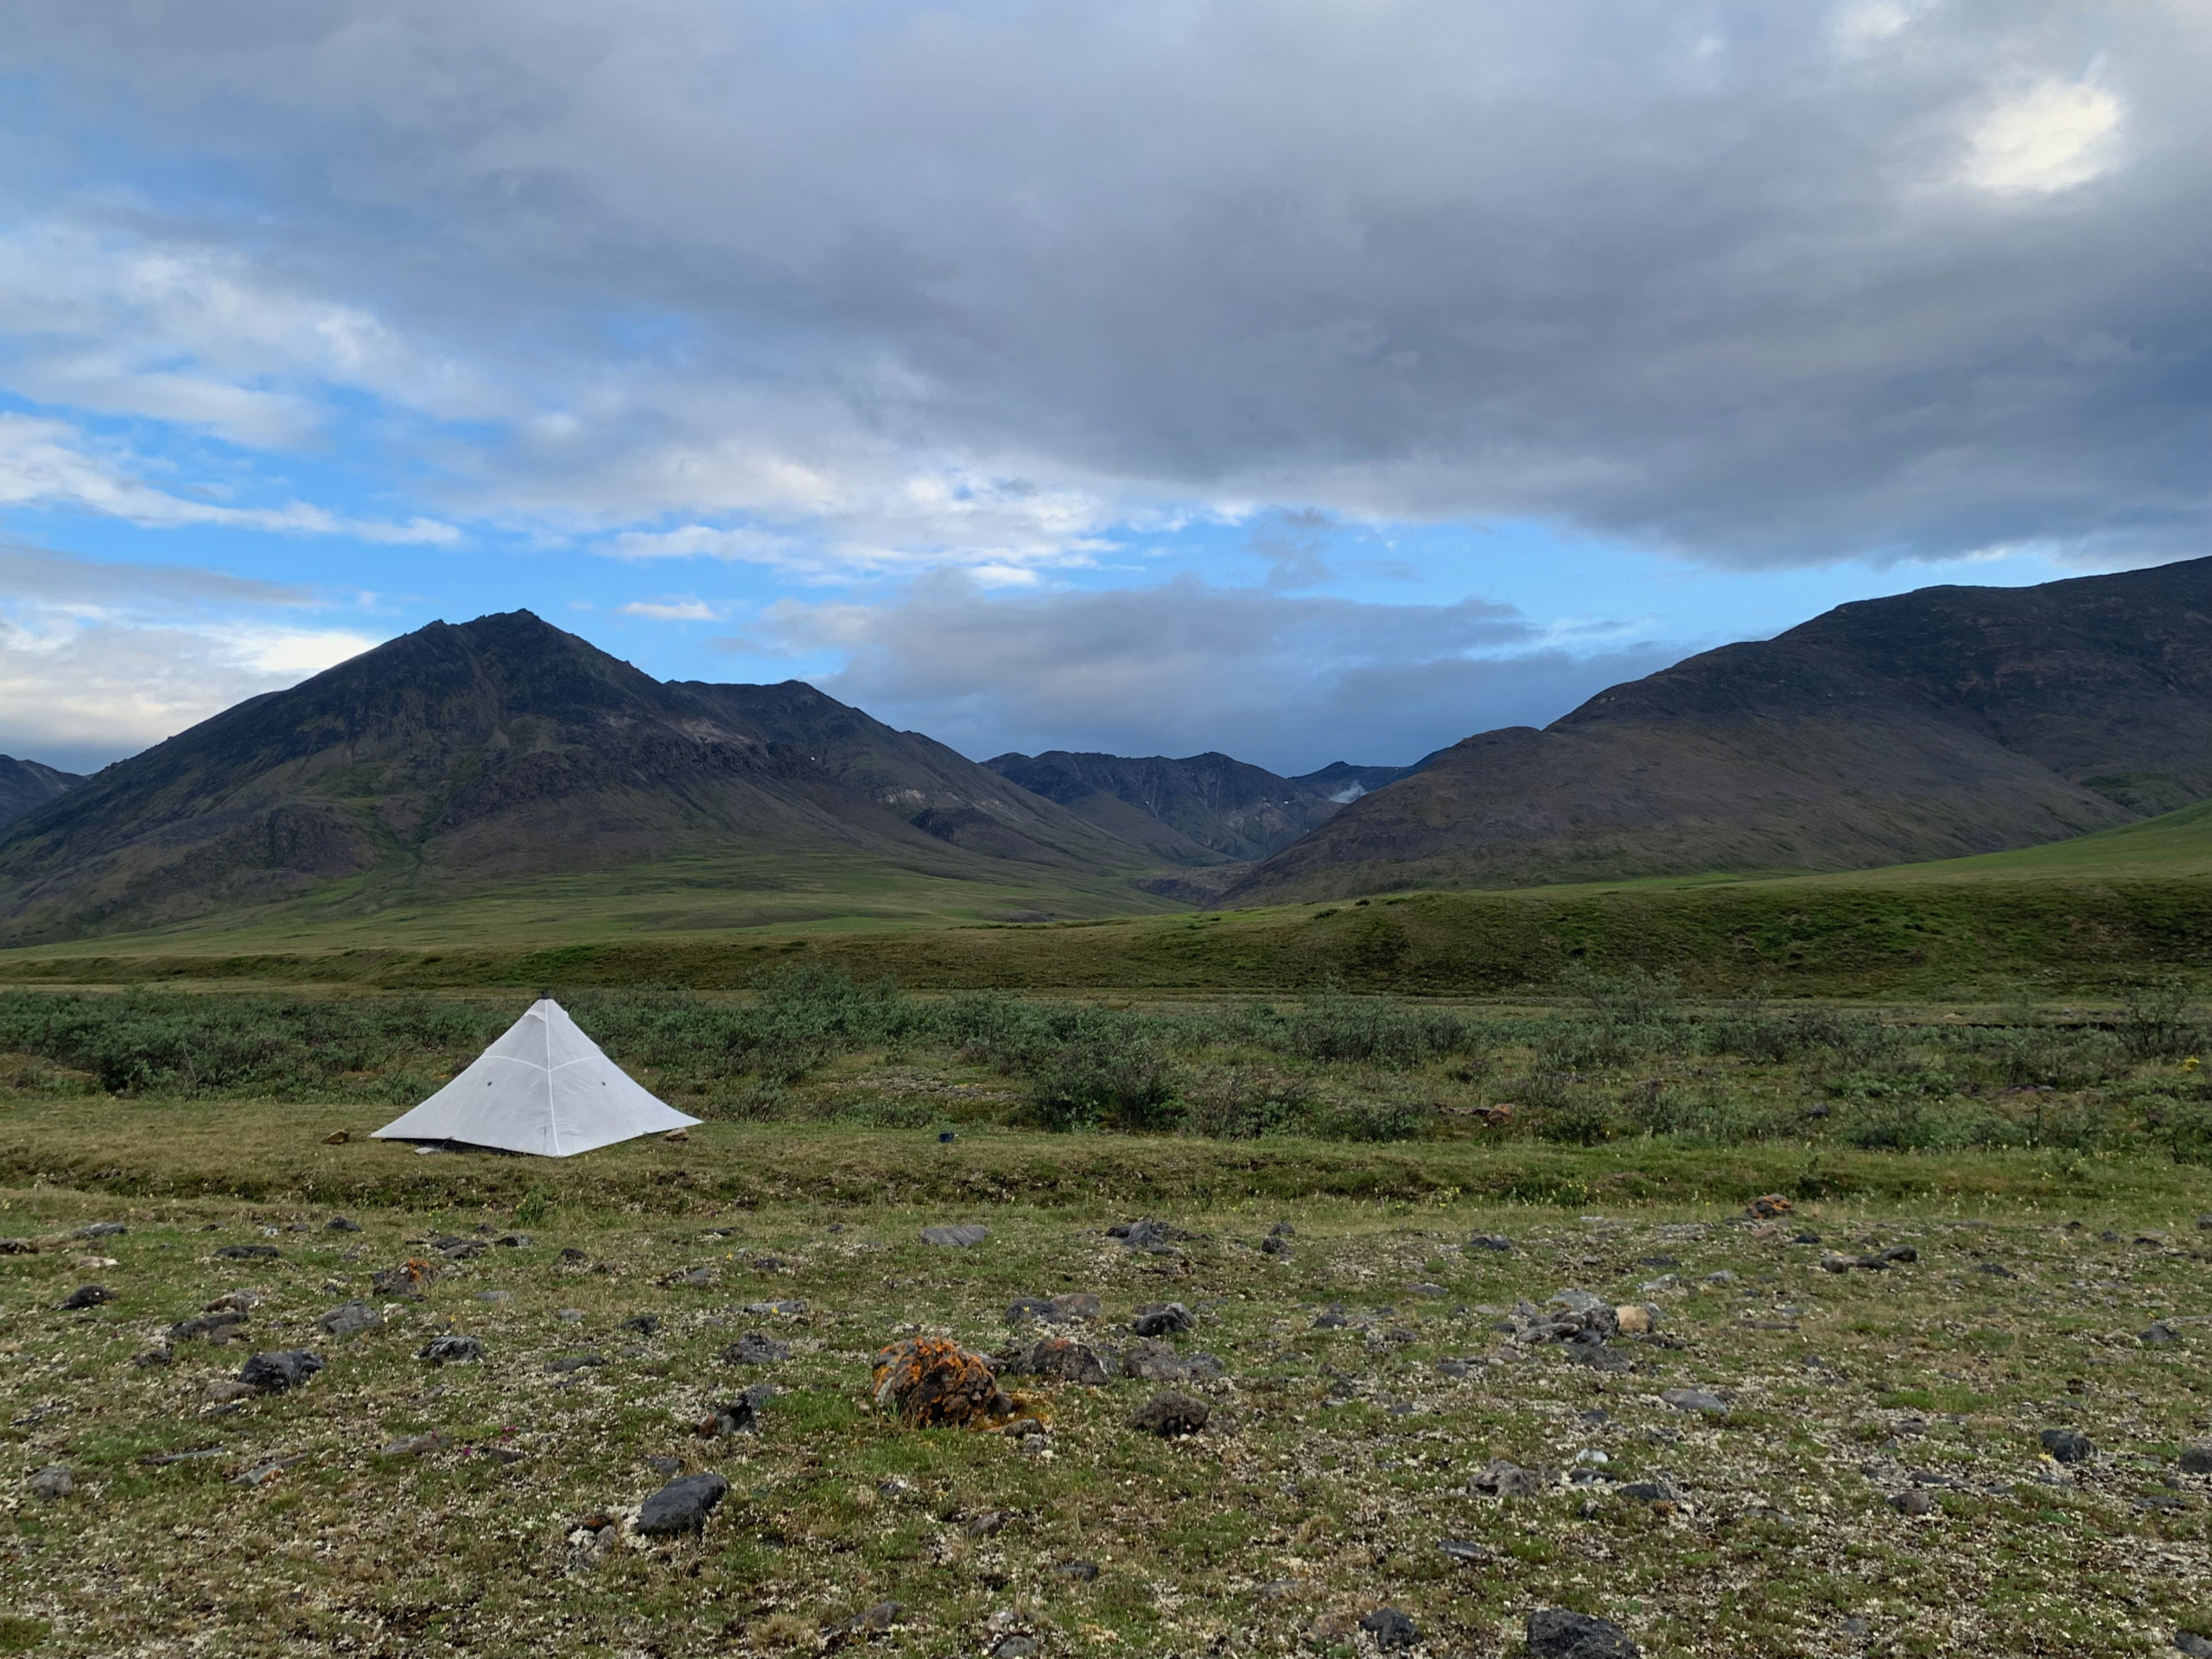 A cook shelter in the Sadlerochit Mountains of the Arctic National Wildlife Refuge